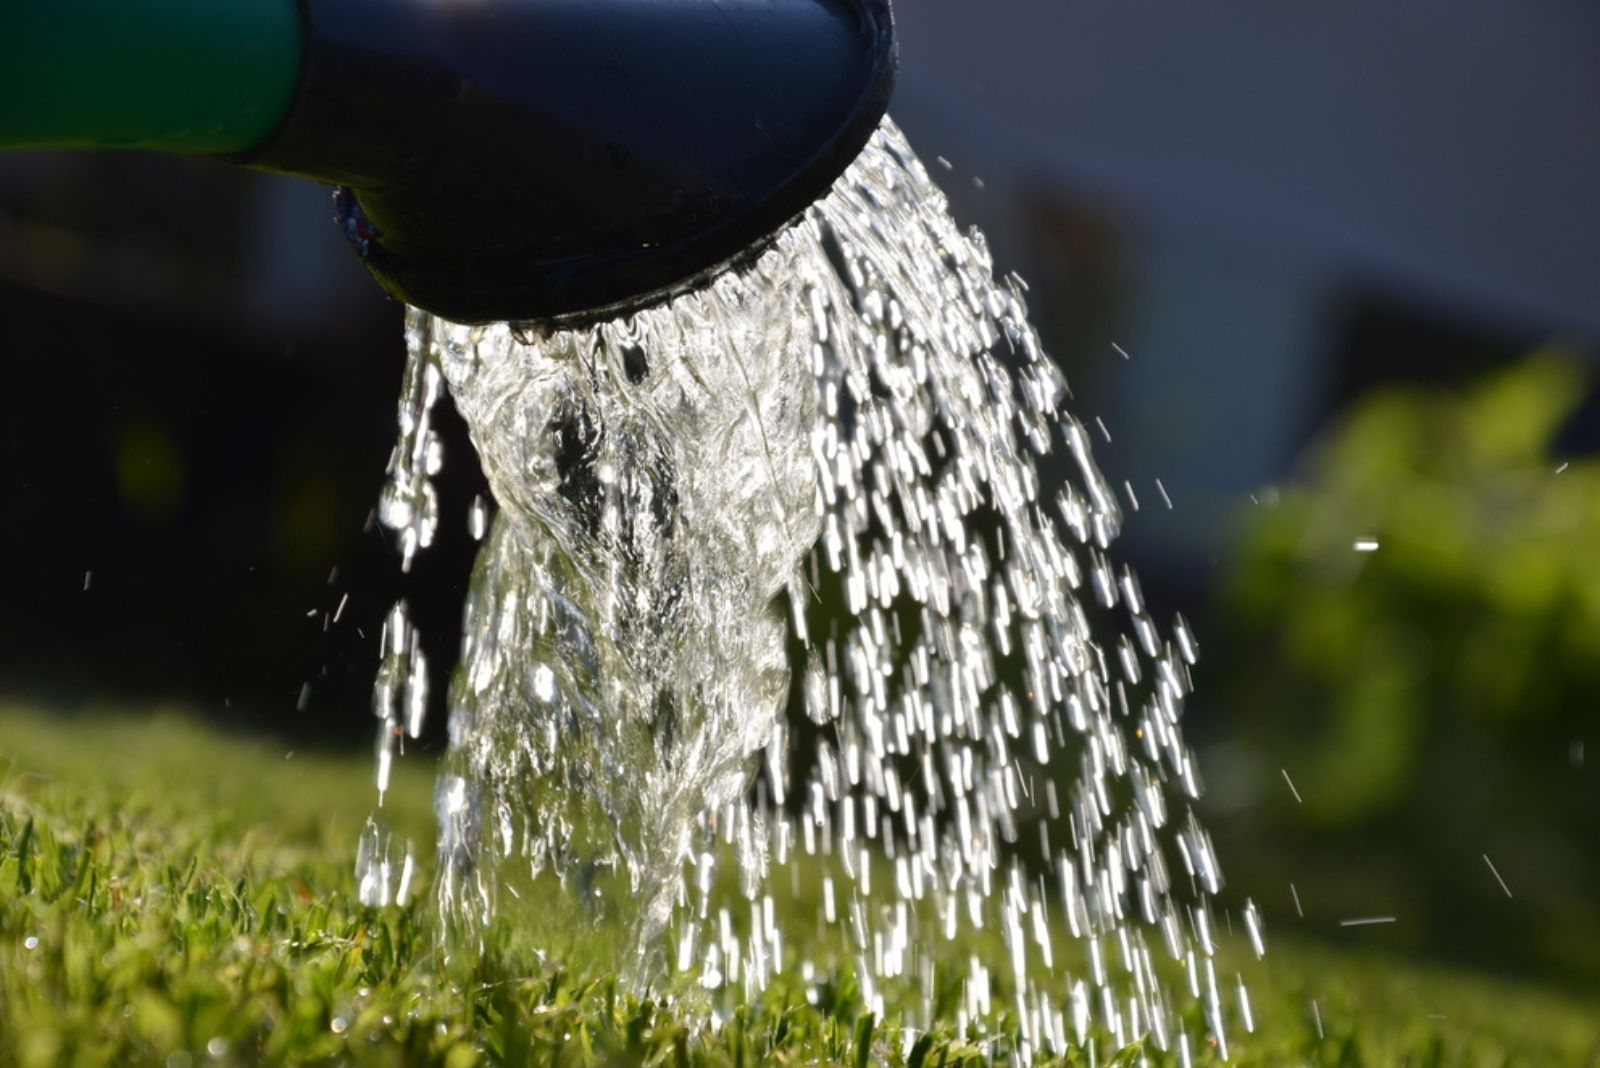 Watering the lawn after mowing